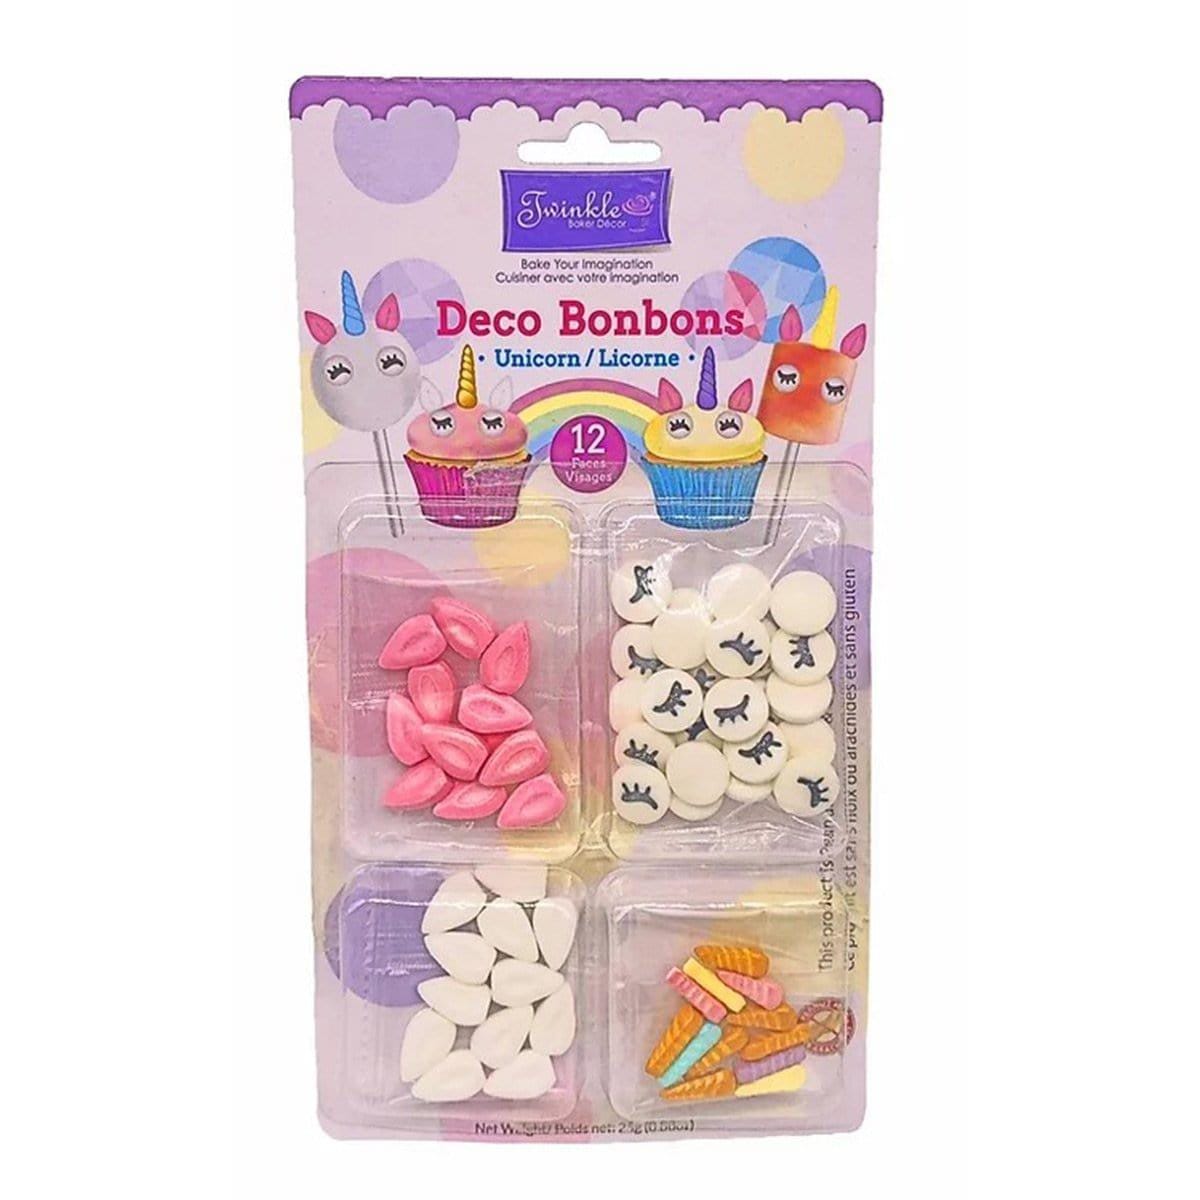 Buy Cake Supplies Unicorn Decorations Candy Kit sold at Party Expert